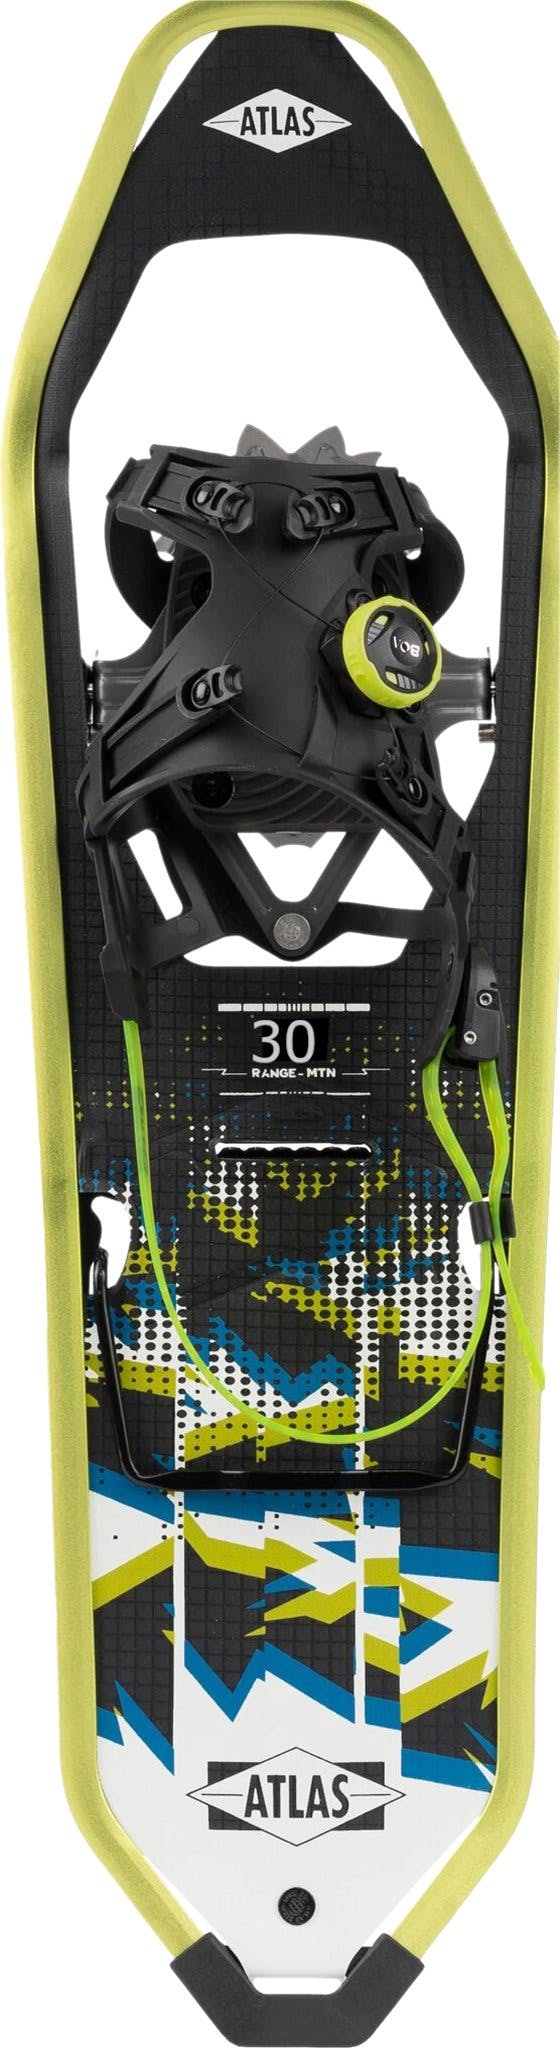 Product gallery image number 1 for product Range-MTN 30 inches All-mountain Snowshoes - Men's